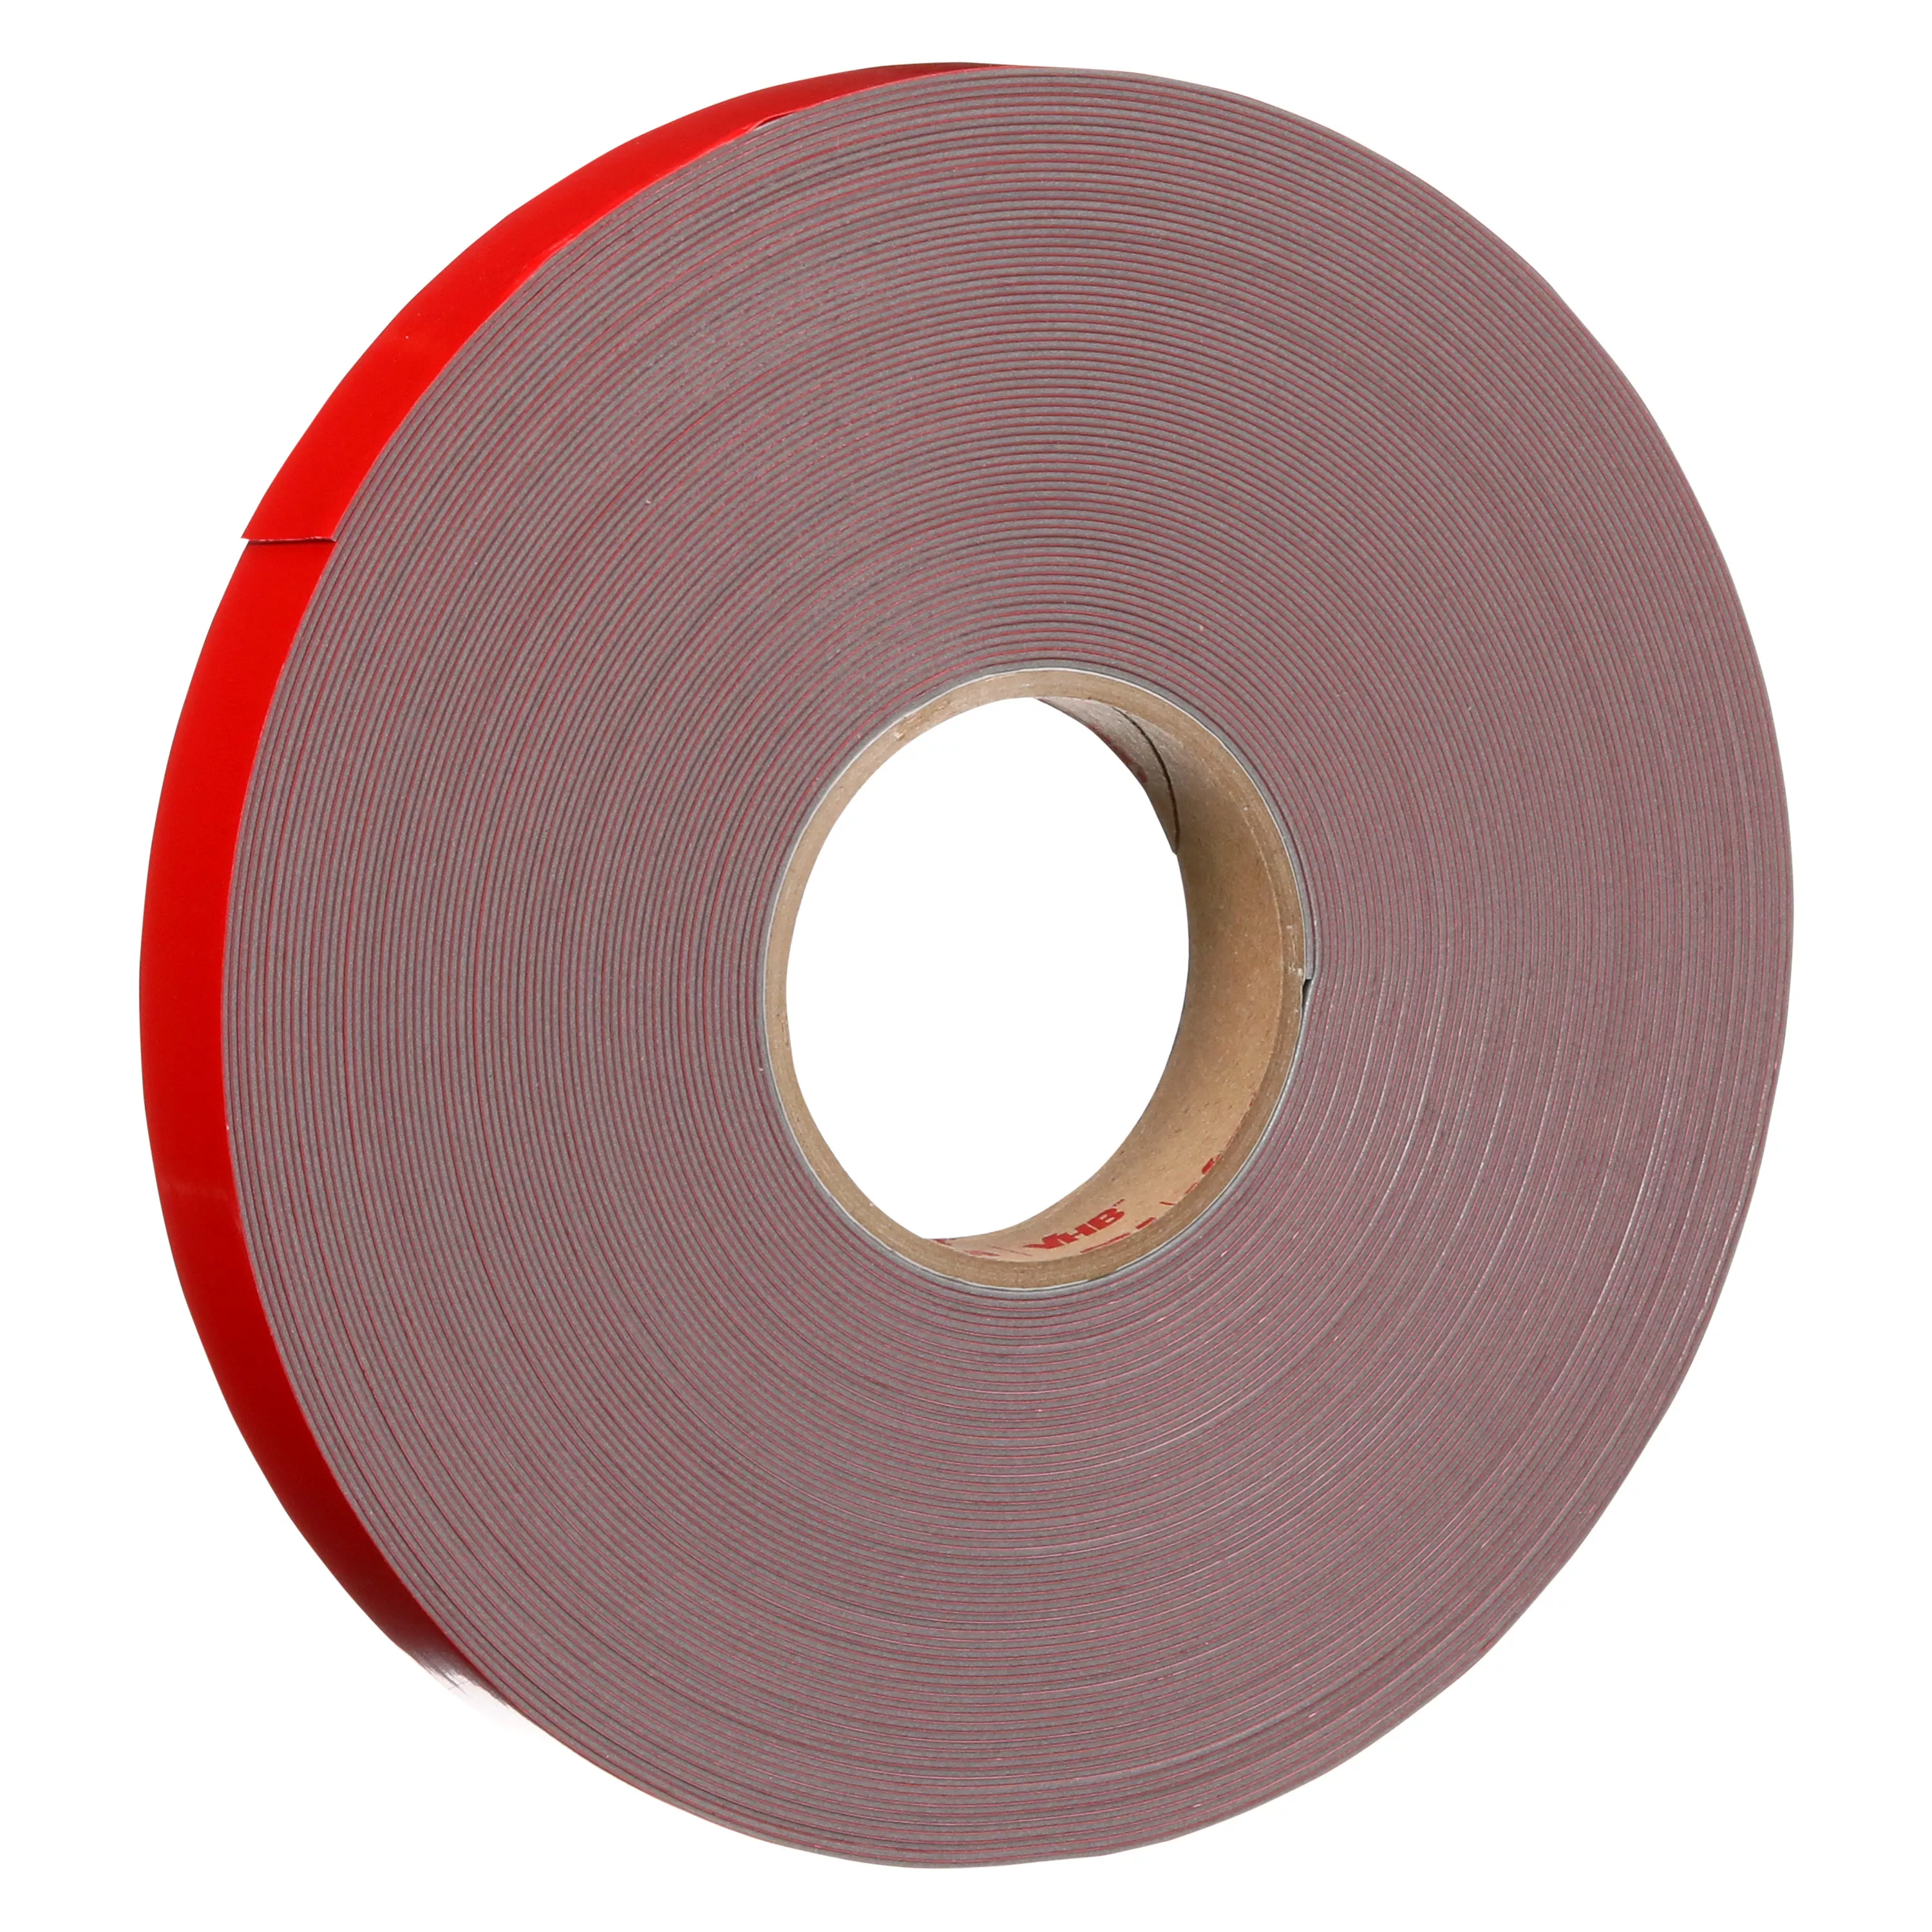 Product Number 4611 | 3M™ VHB™ Tape 4611